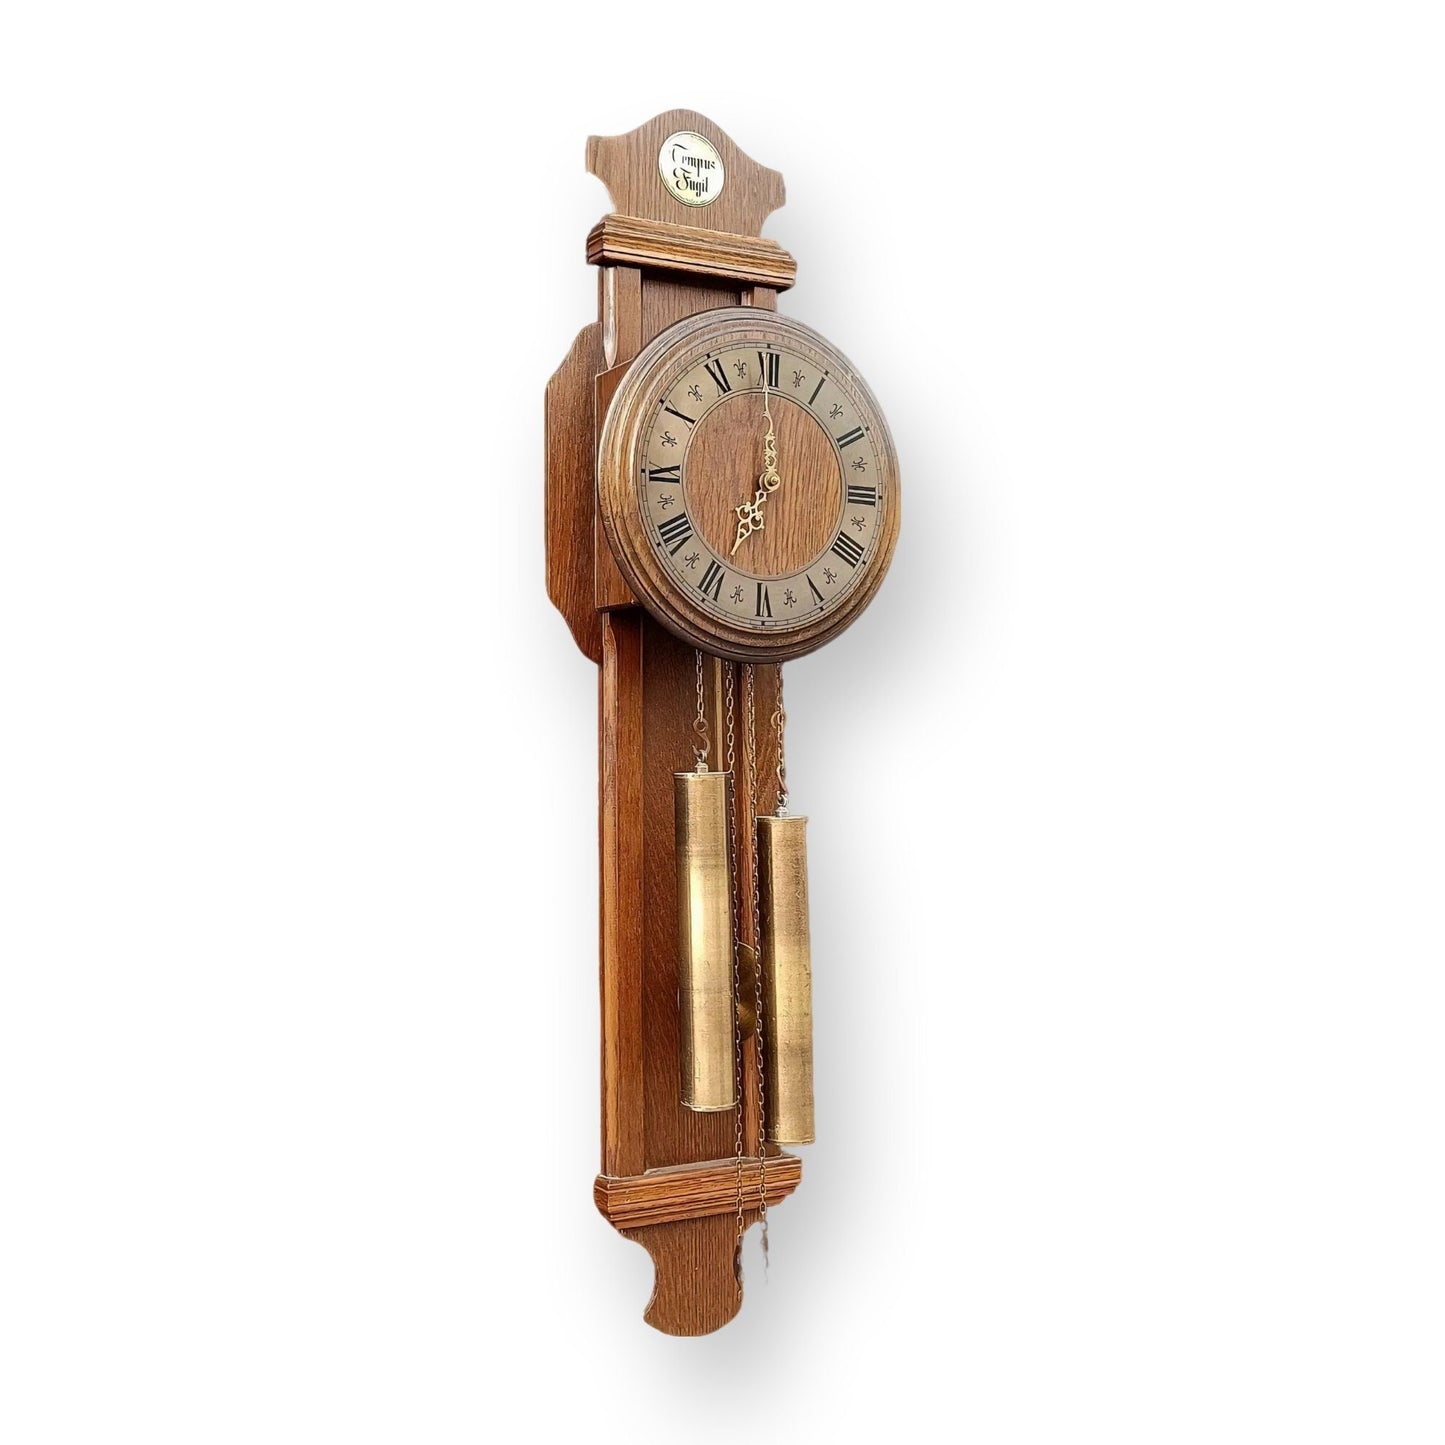 Antique Tempus Fugit Wall Clock | 1960s | German Made | Dual Weight Winding Mechanism | Fully Functional